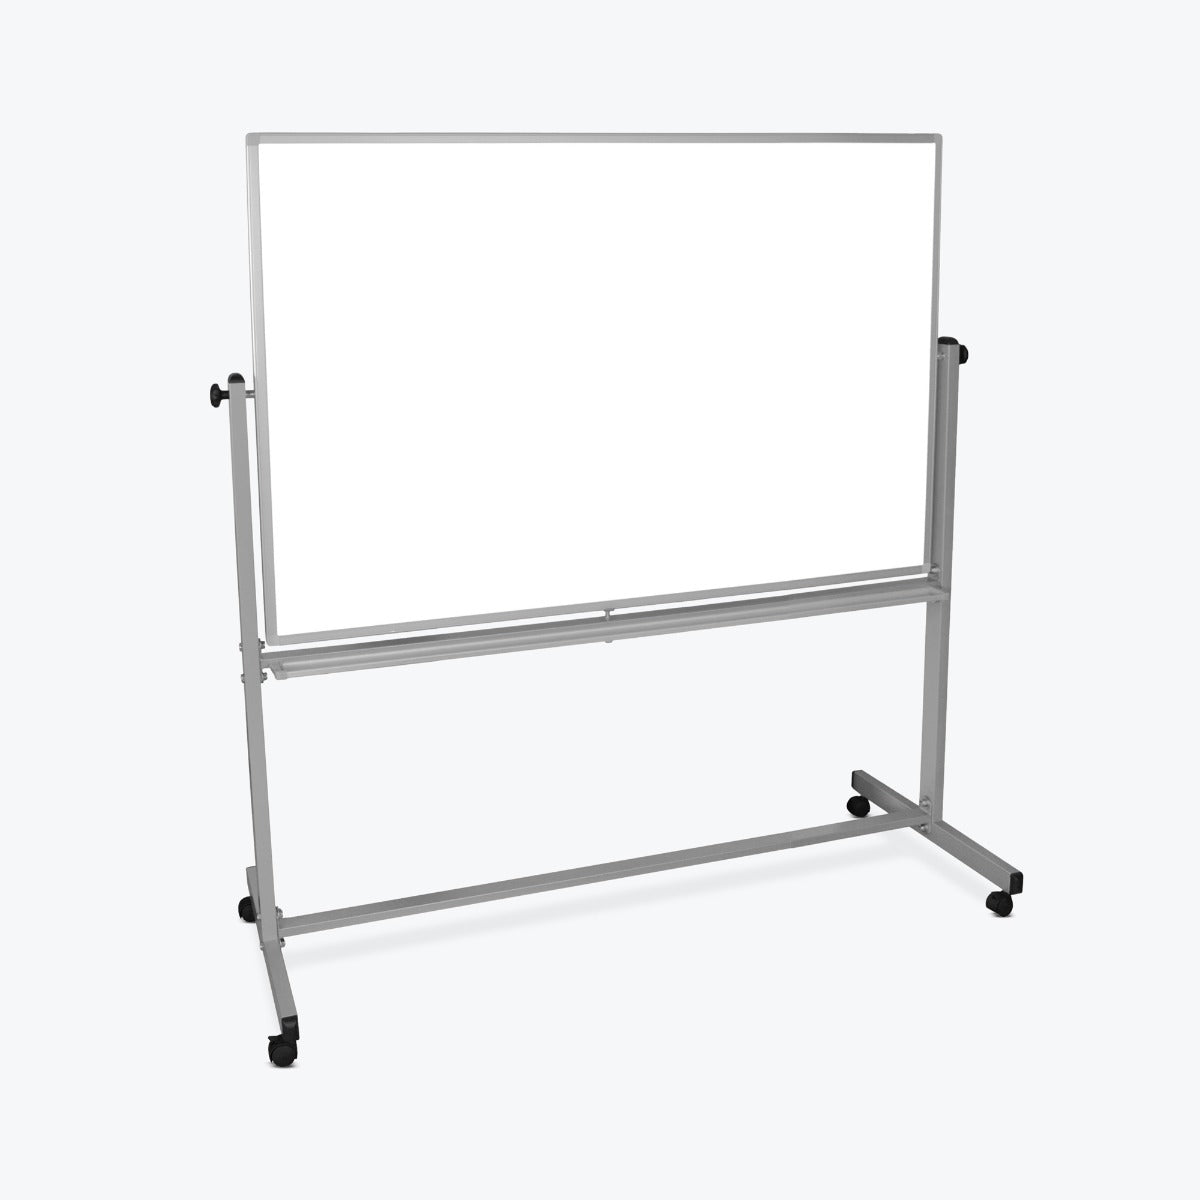 60"W x 40"H Mobile Whiteboard - Double-sided Magnetic dry erase markerboard - Luxor MB6040WW - SchoolOutlet